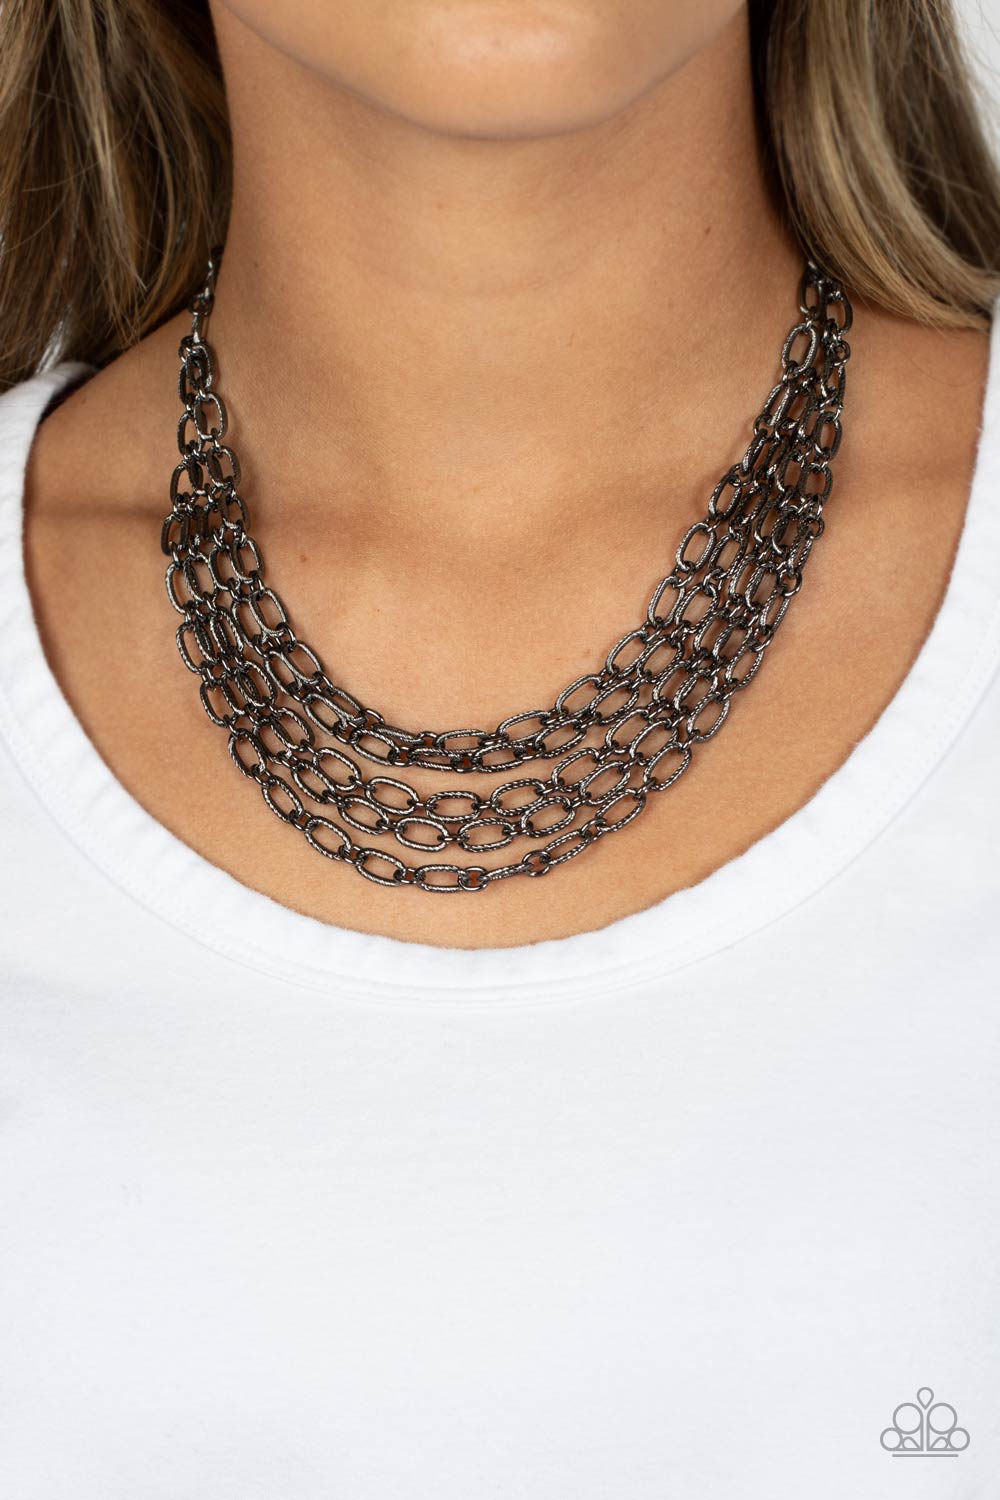 House of CHAIN Gunmetal Black Necklace - Paparazzi Accessories- lightbox - CarasShop.com - $5 Jewelry by Cara Jewels